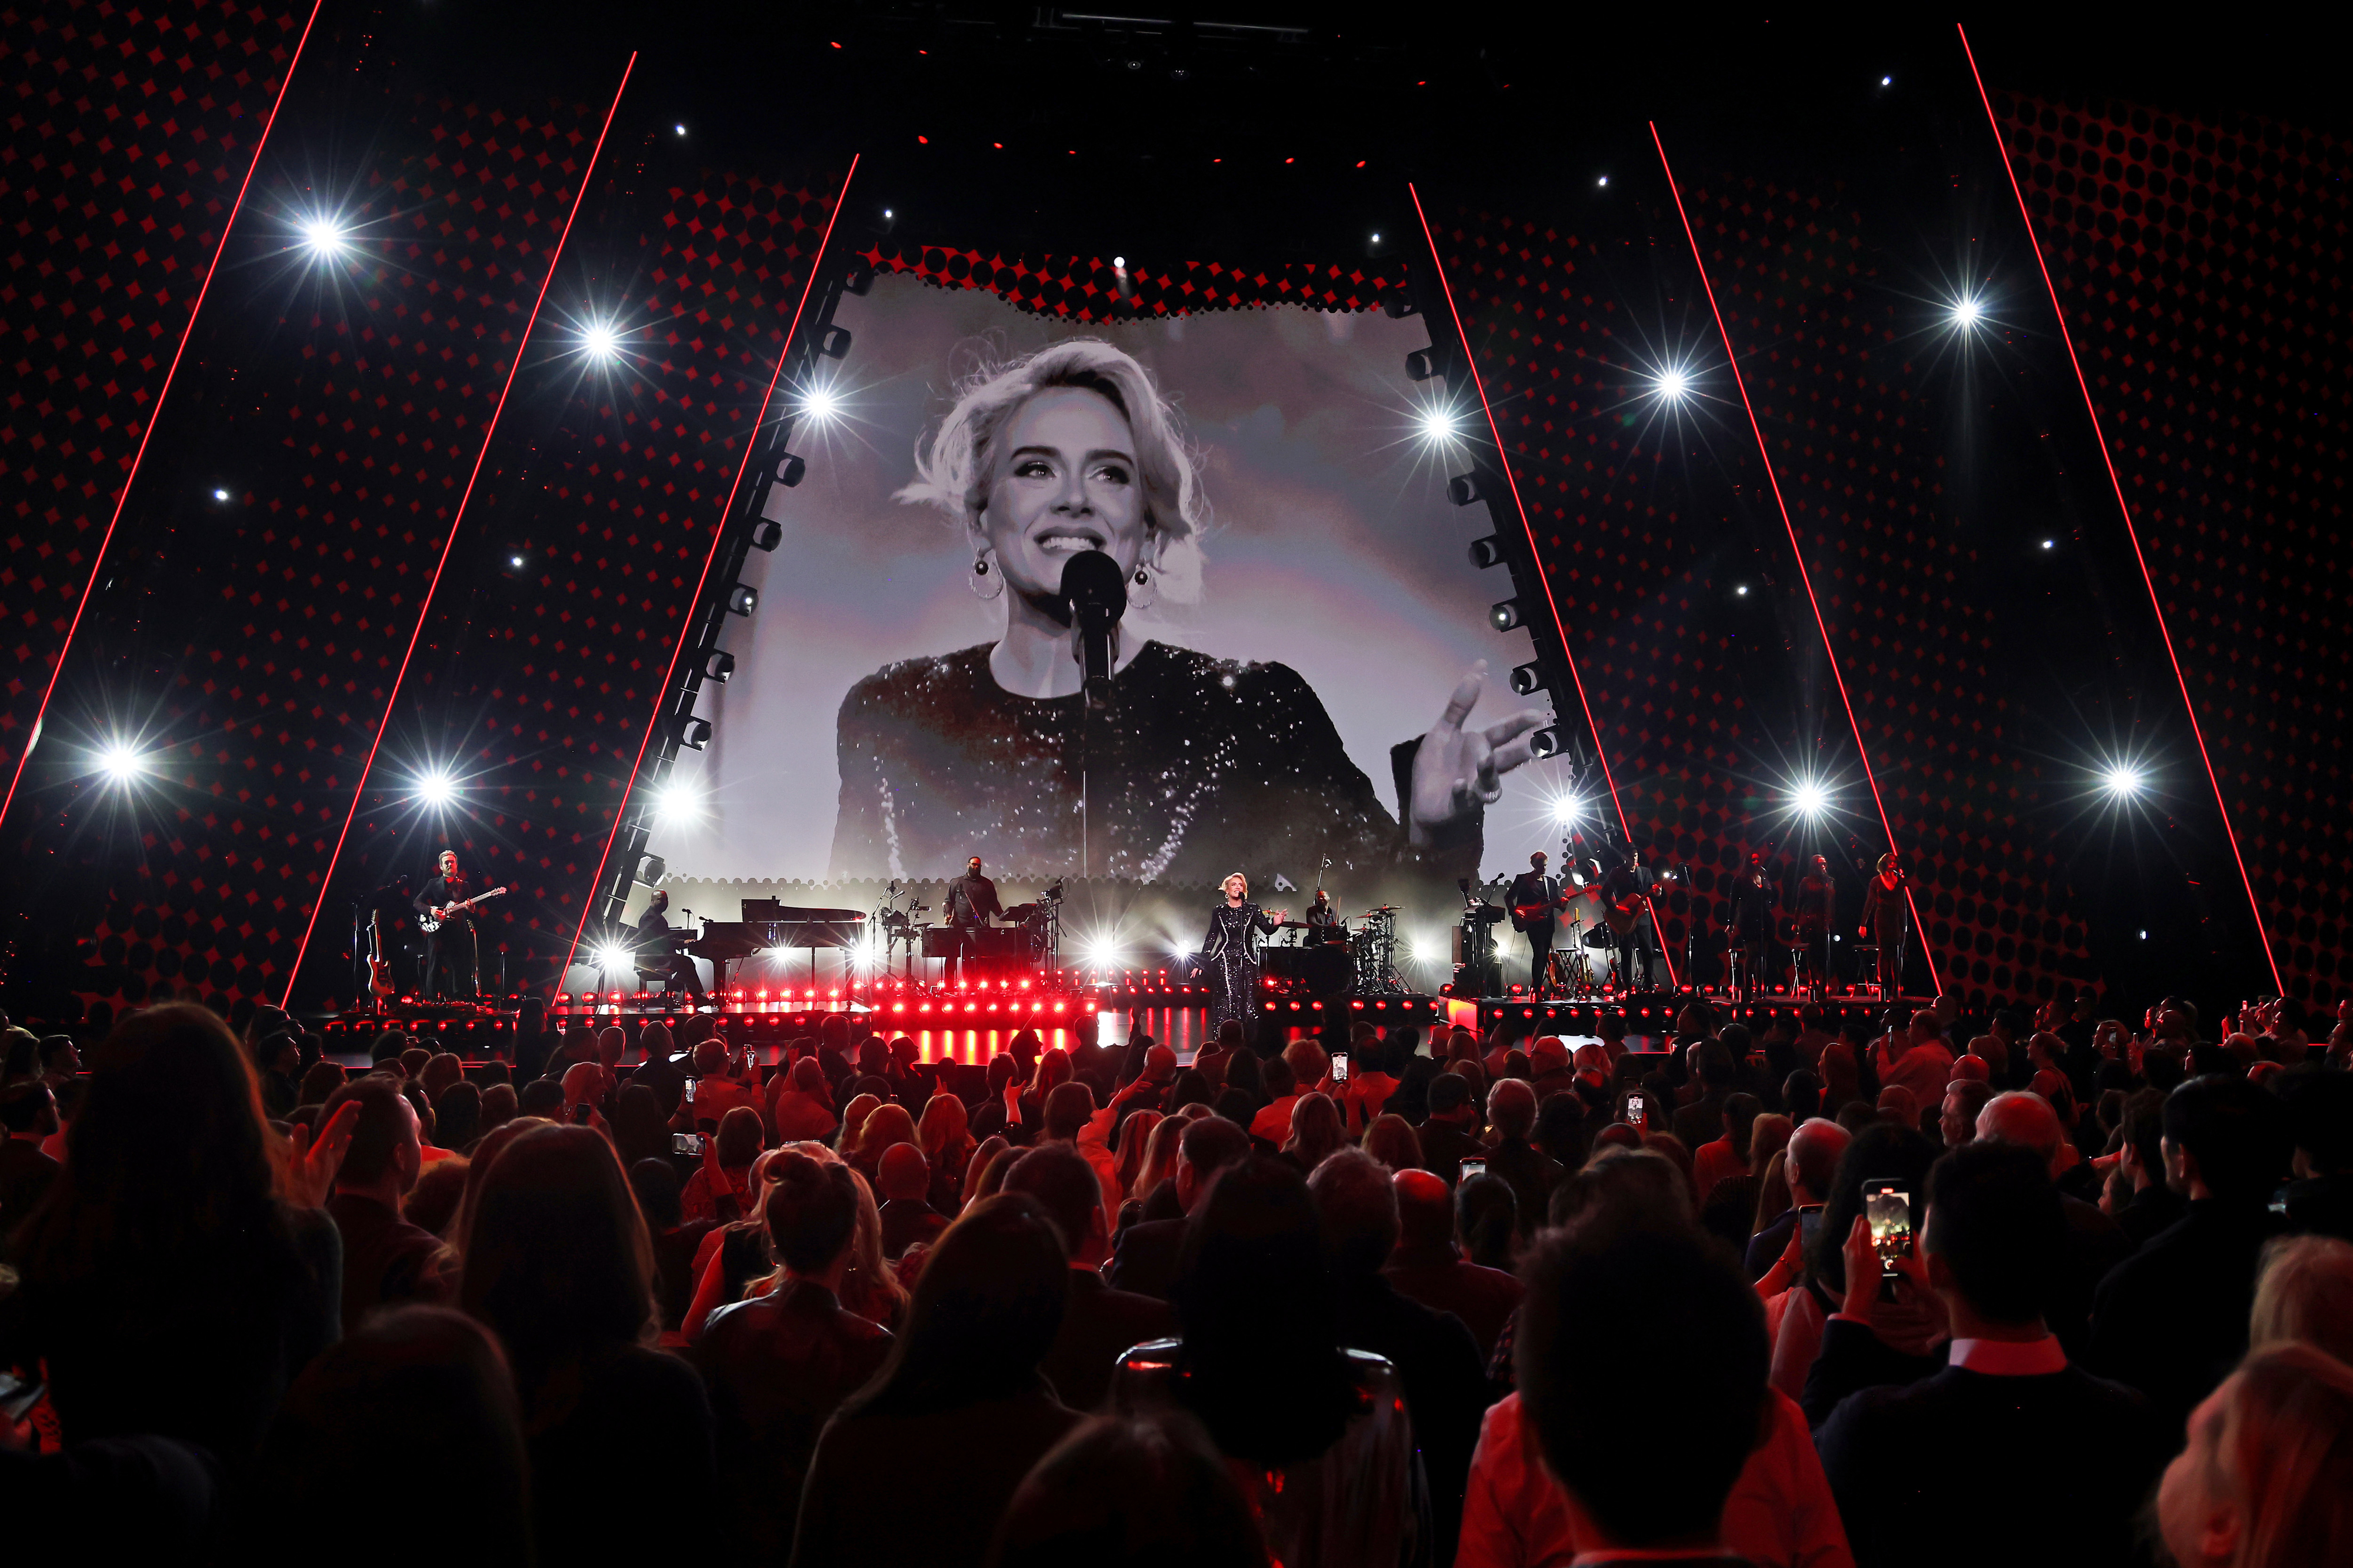 Crowd watching Adele perform on stage with a band, large screen in the background showing the artist